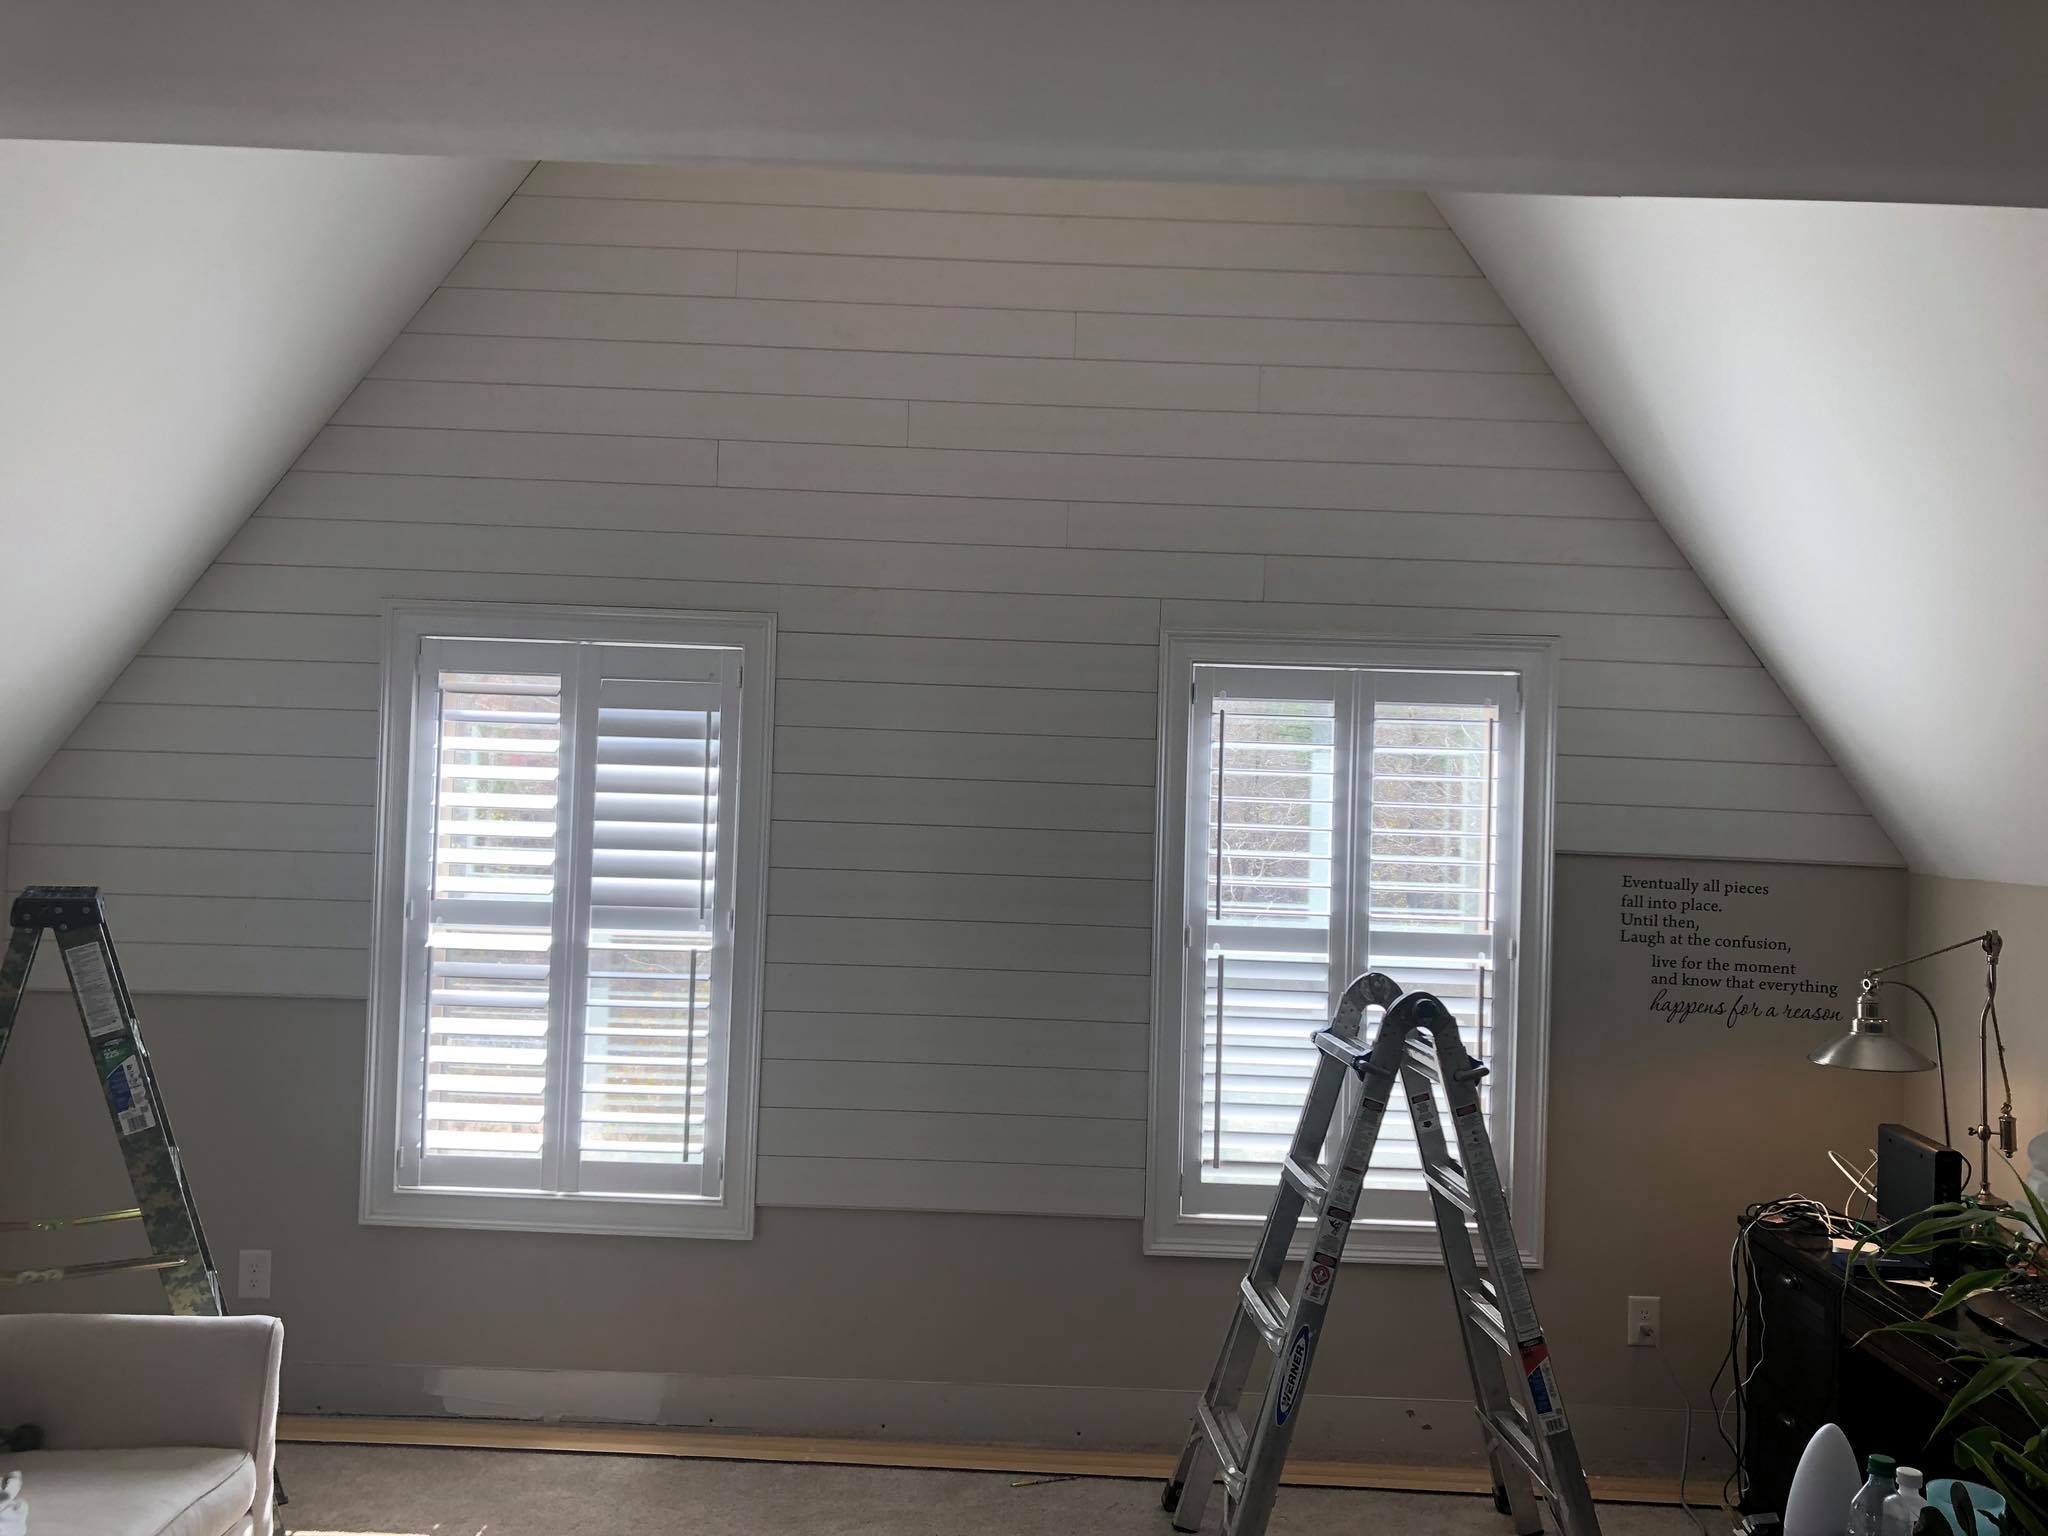 Shiplap On Walls Painted White with Hardwood Floor Installed 9